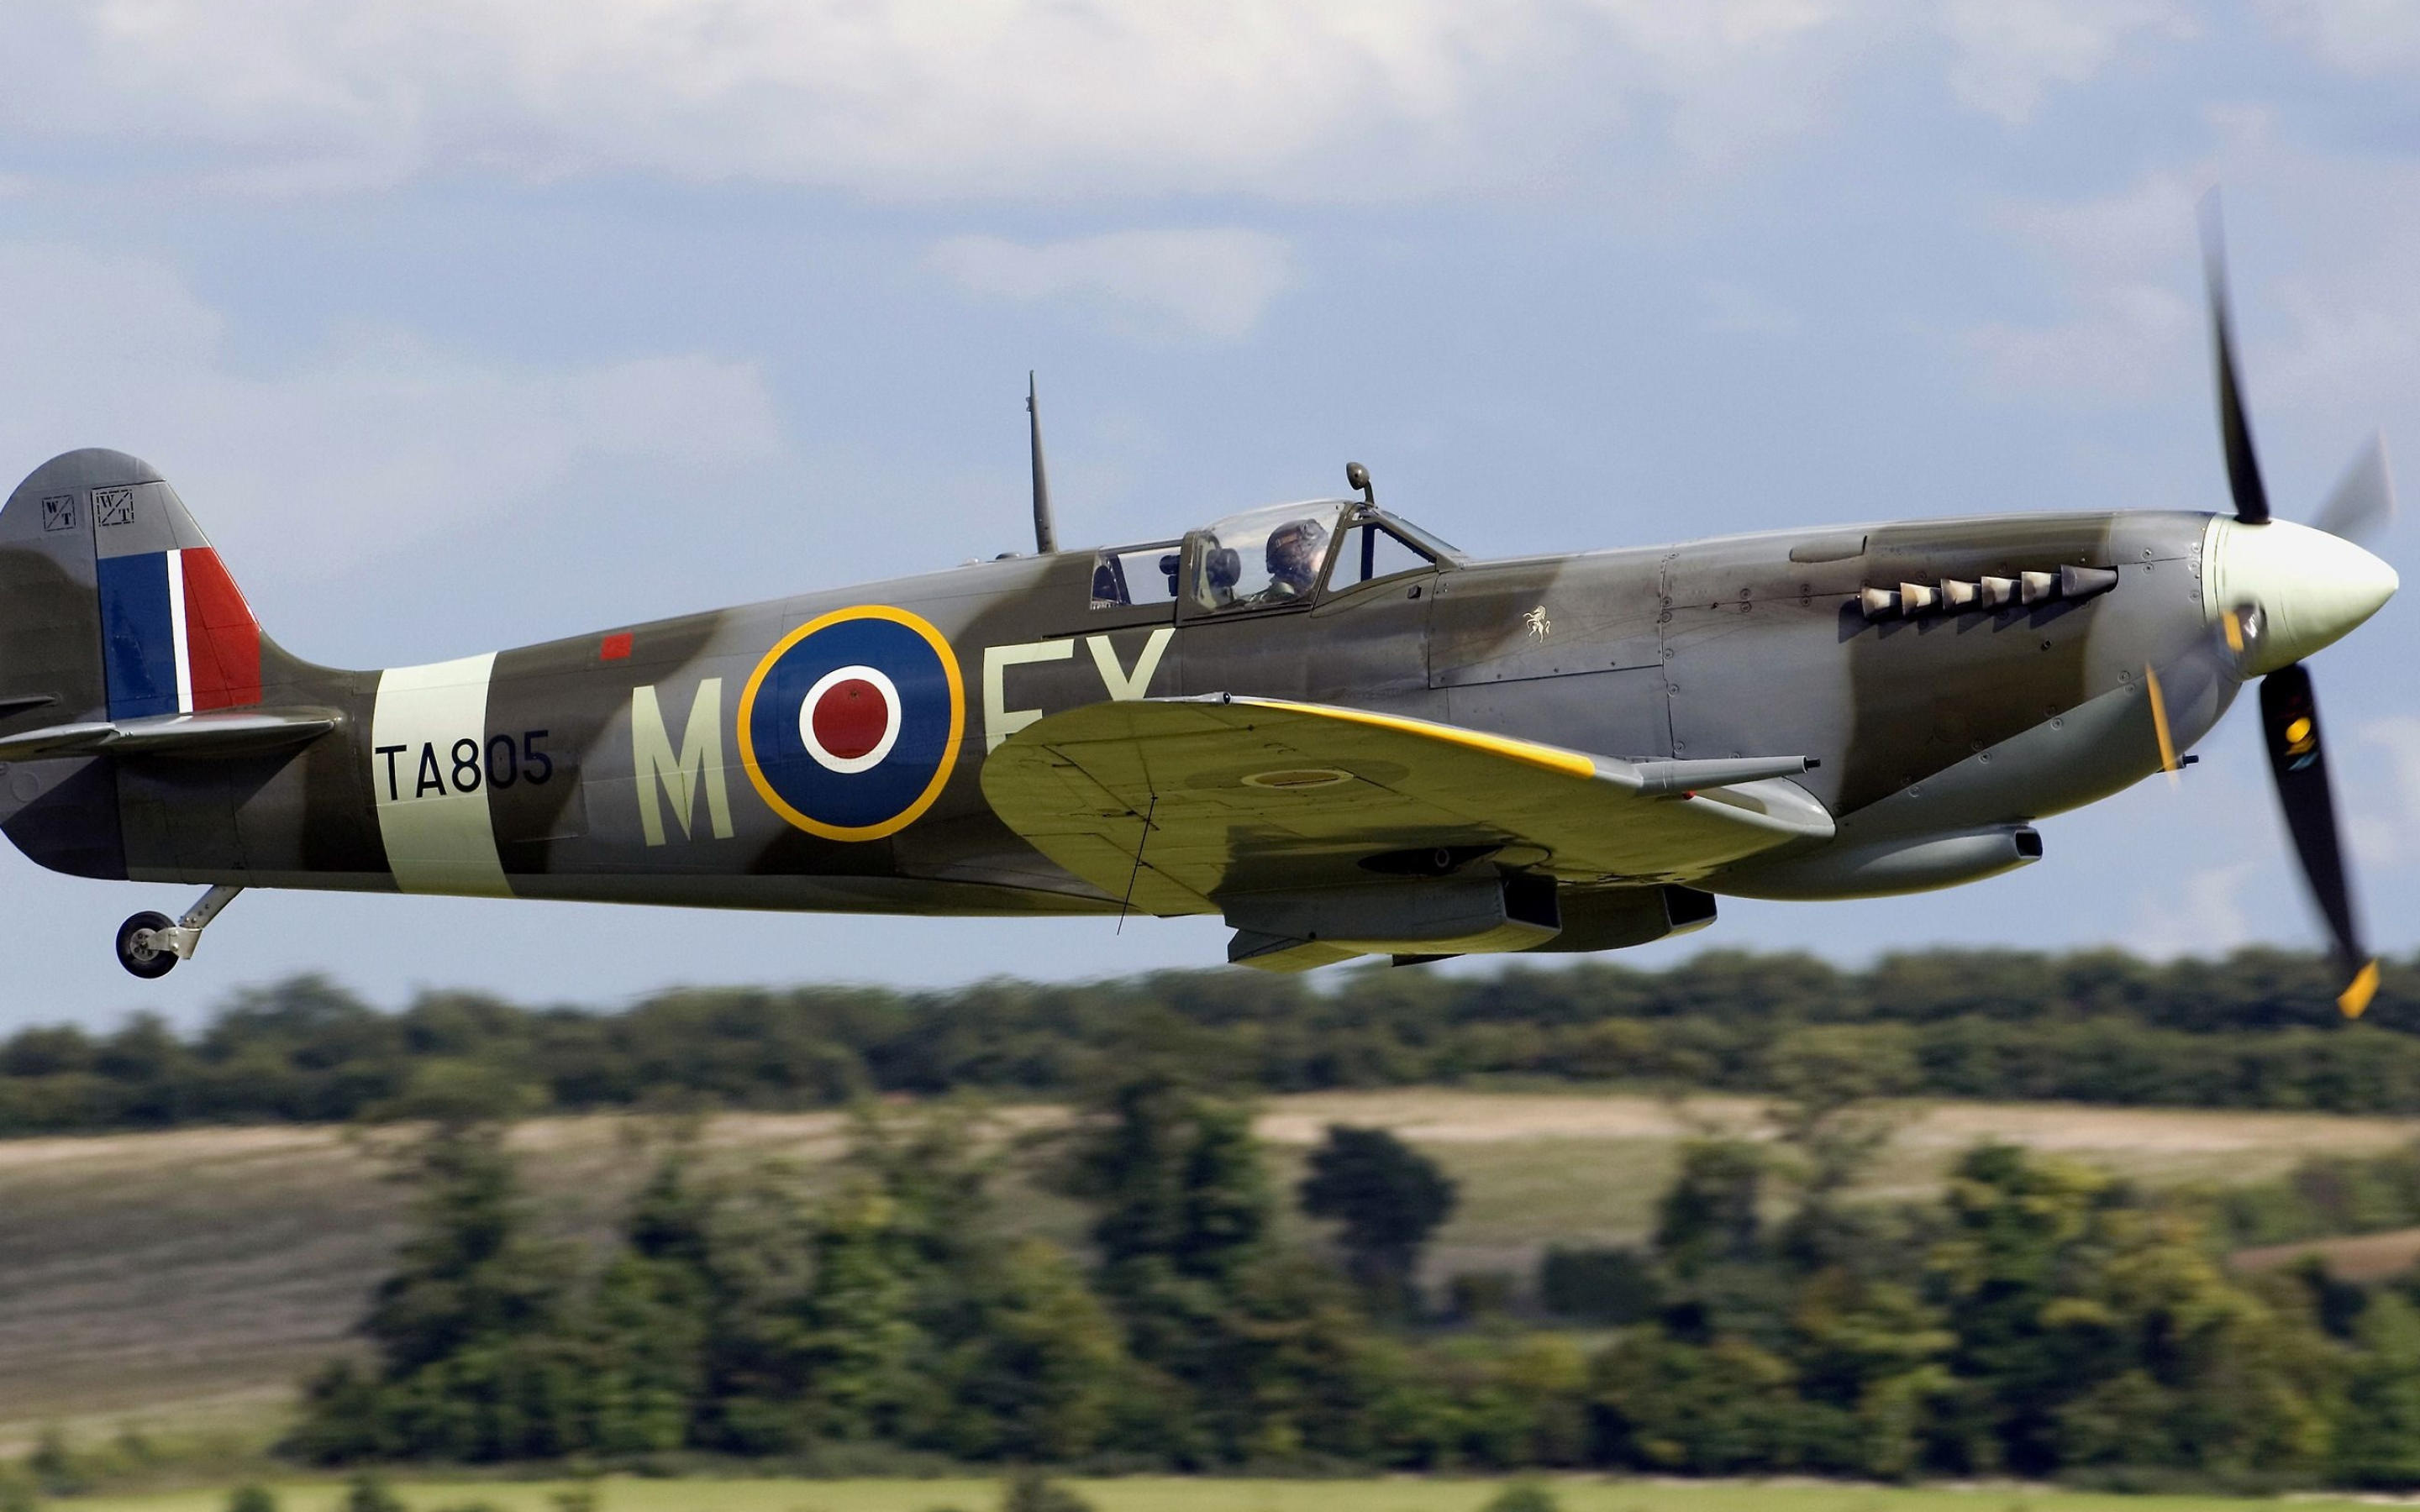 Spitfire wallpapers, Fighter aircraft design, Cave's collection, 2880x1800 HD Desktop